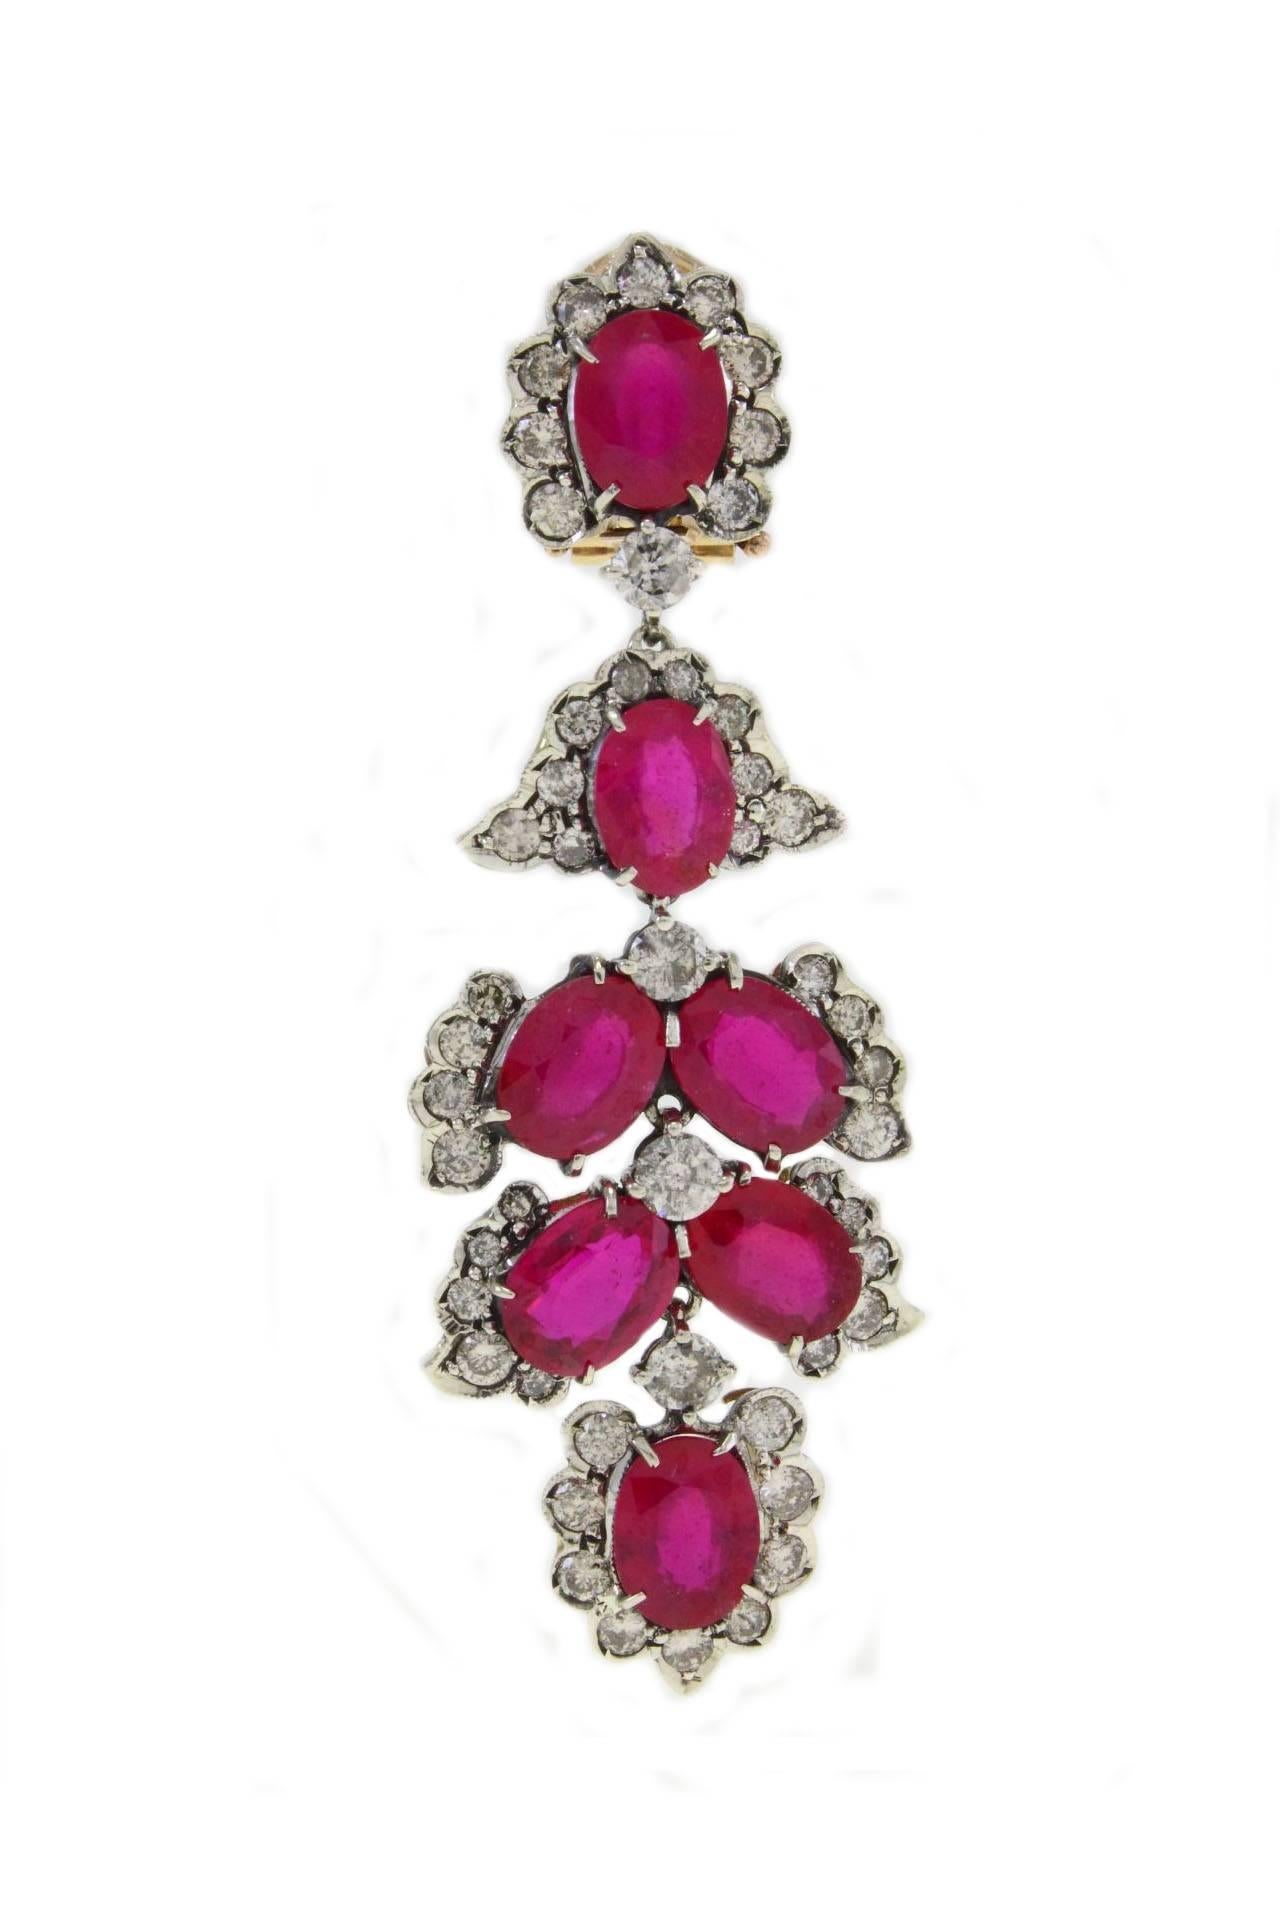 Classic and shapely chandelier earrings in 14K gold embellished with rubies teardrops each drop is surrounded by  diamonds and details in silver.

rubies  (27.52 Kt) 
diamonds  (5.58Kt) 
details in silver (4.48gr)
tot weight 16gr
Ref. Cod. ircr
US